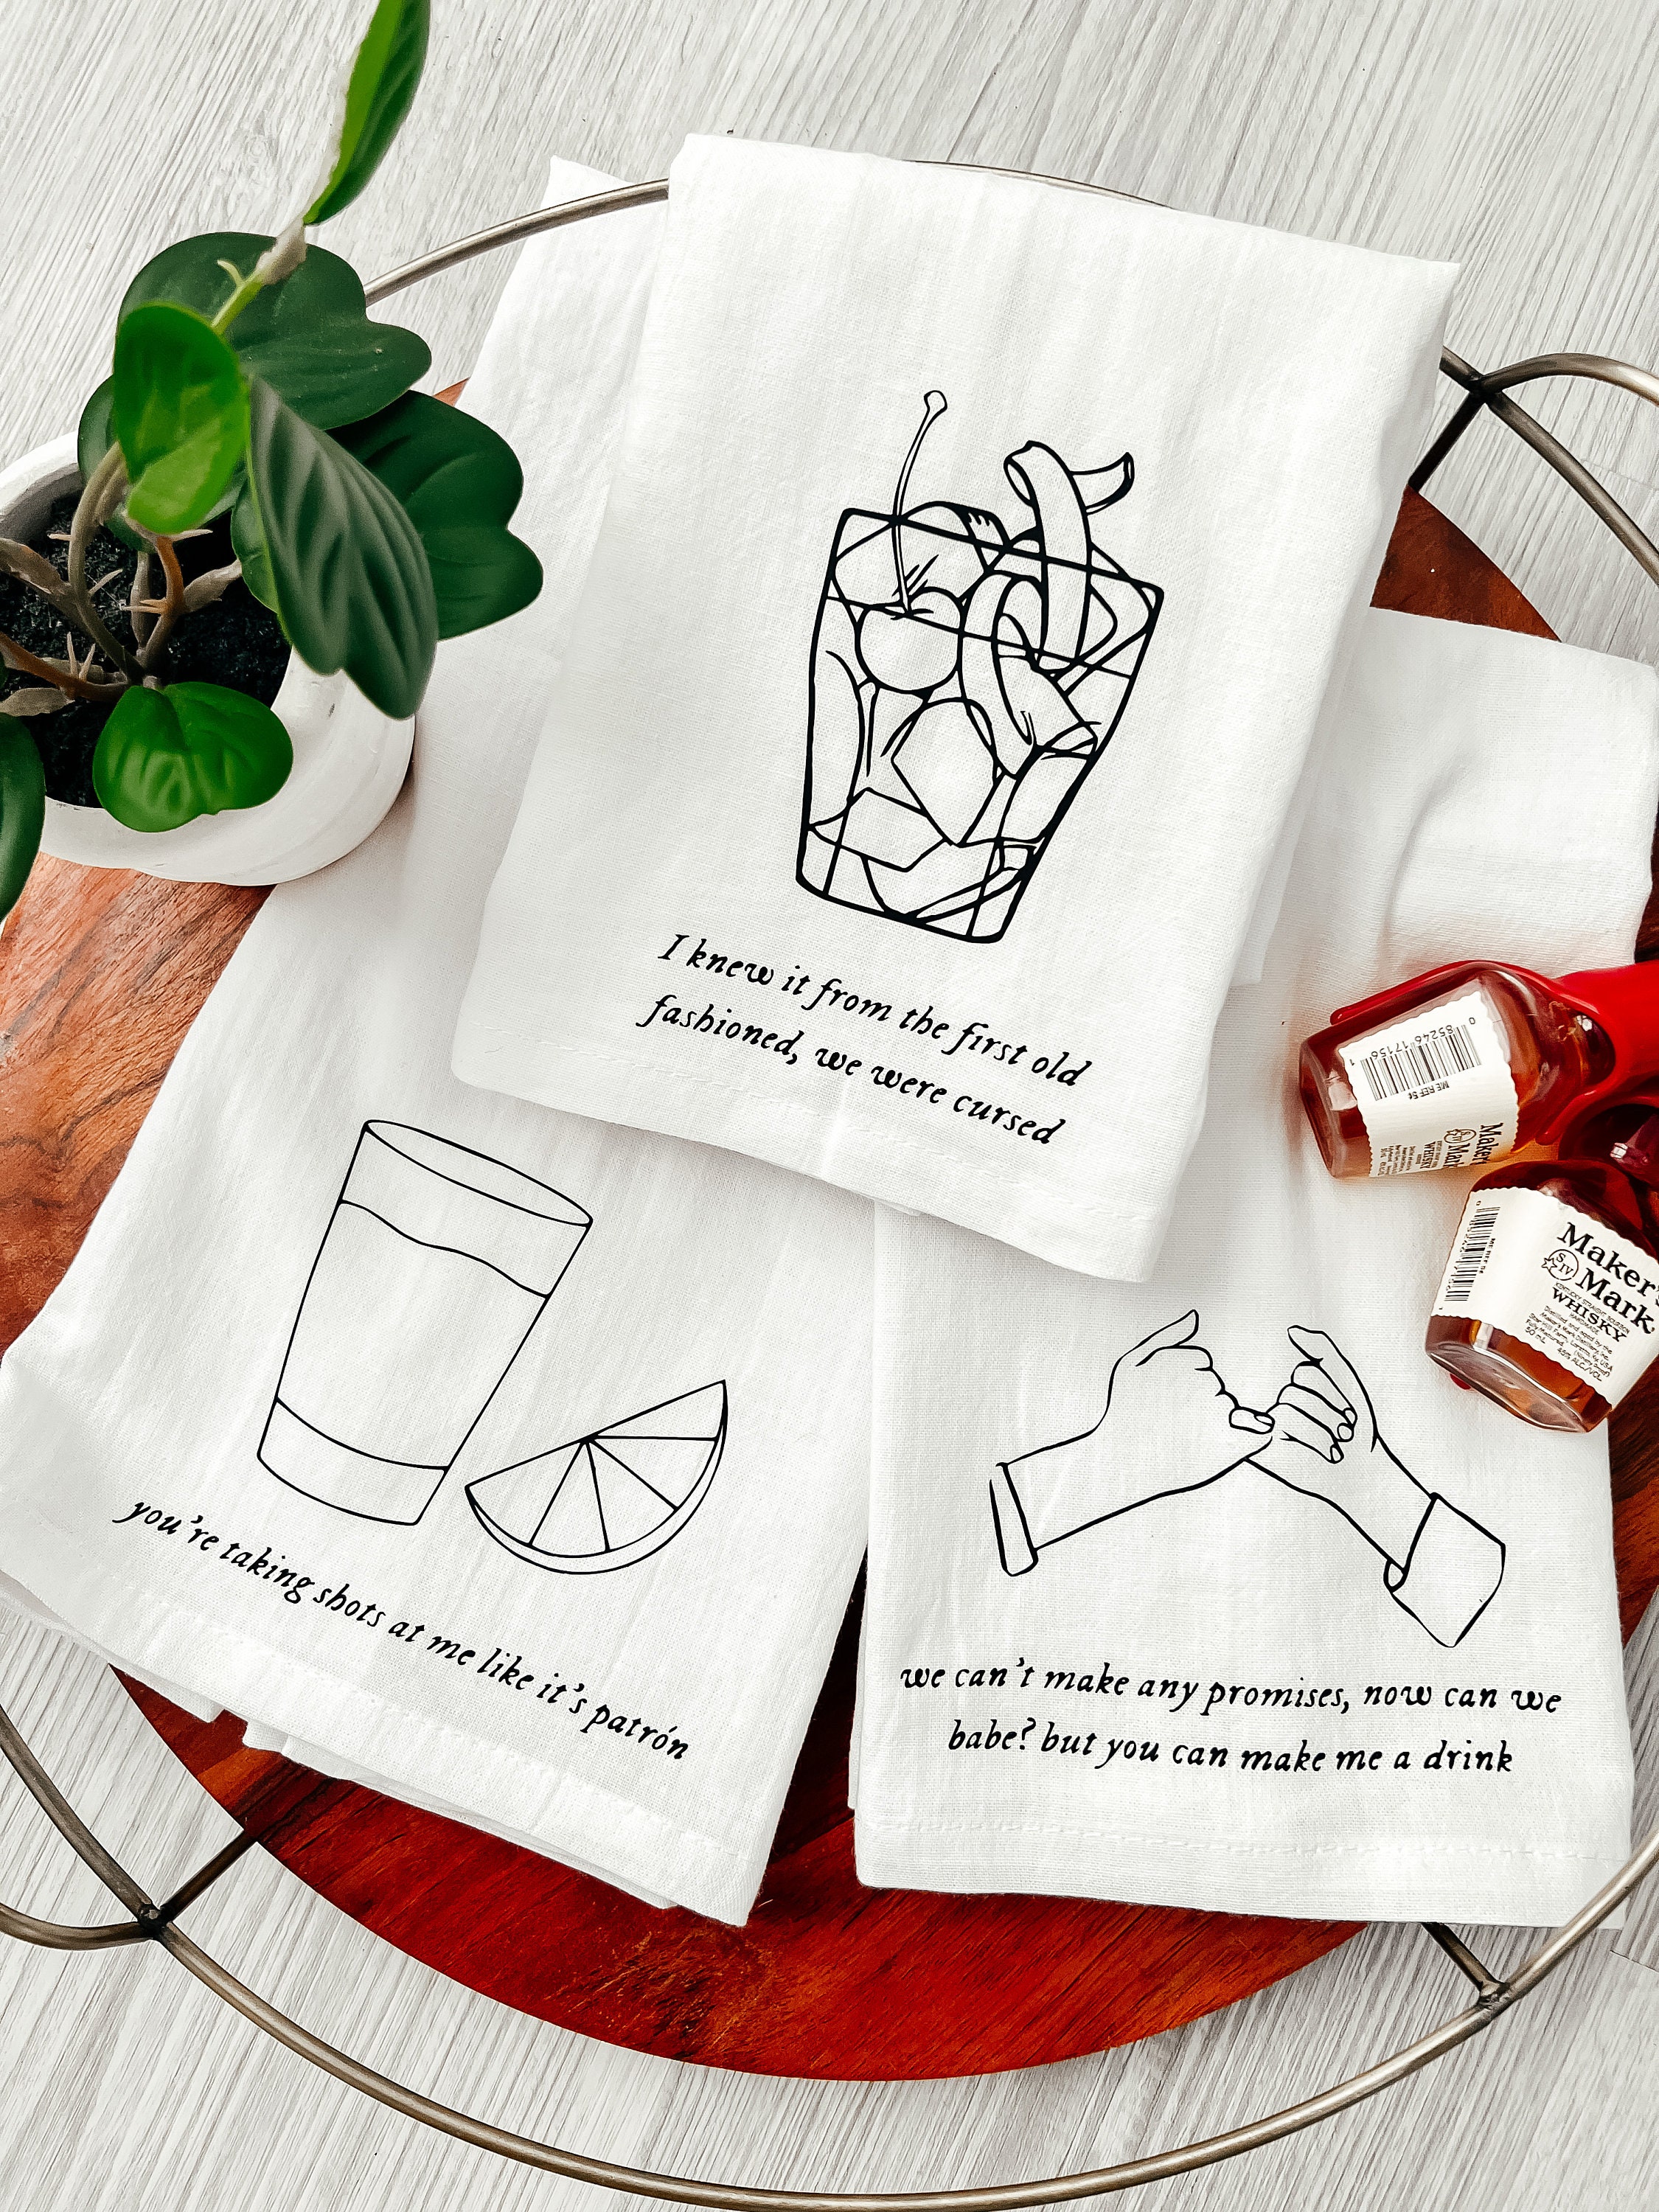 Song Lyric Kitchen Towel, You Can Go Your Own Way, Fleetwood Mac, Vintage  Housewife Funny Kitchen Towel, Tea Towel, Dish Towels, 